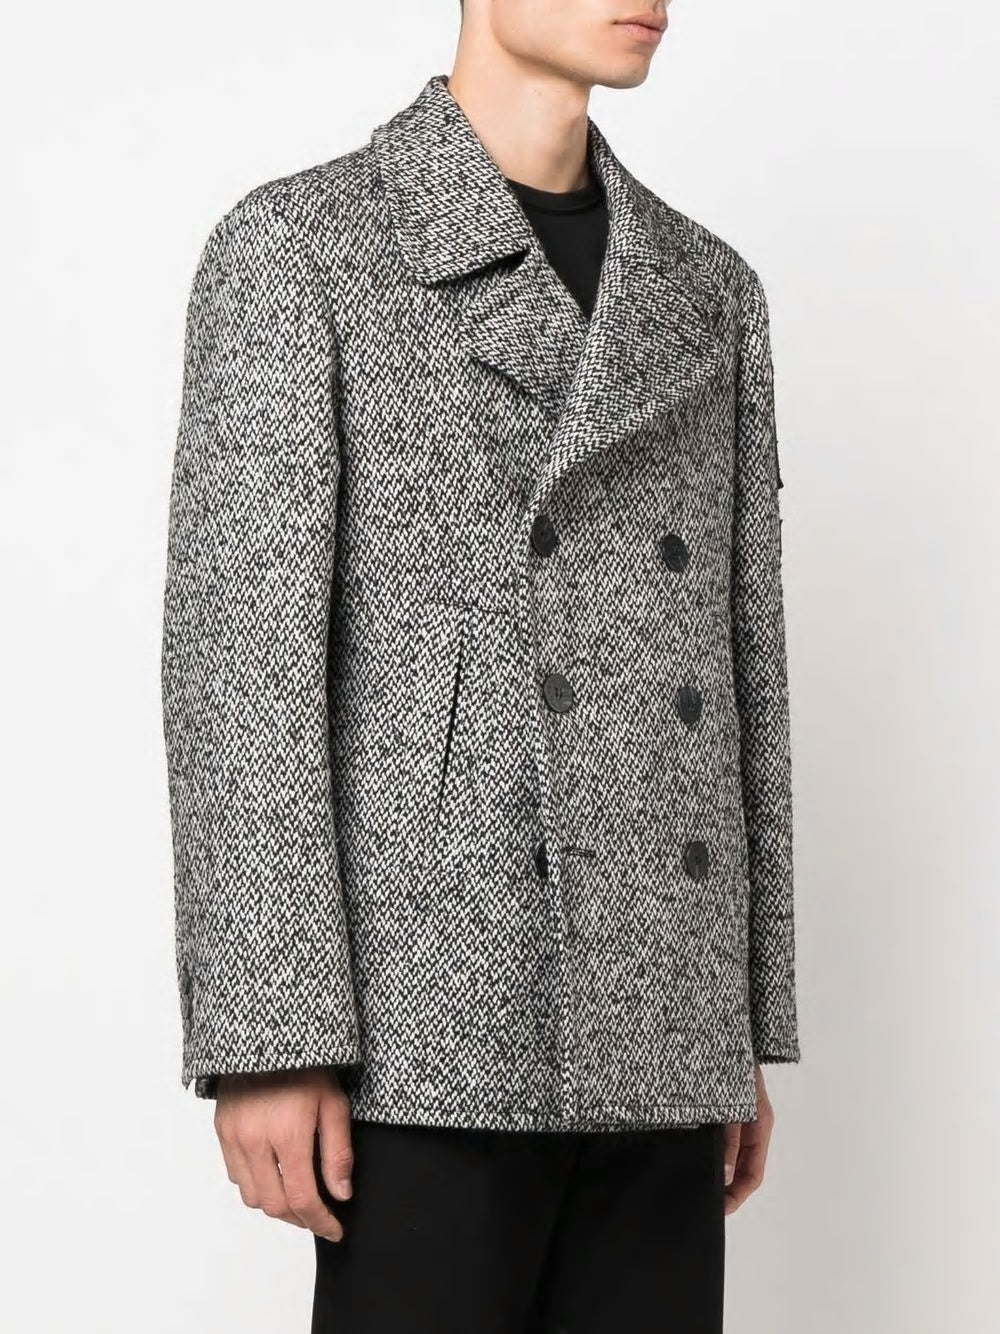 NEIL BARRETT Black and Off-White Double Breasted Military Peacoat for Men - FW22 Collection